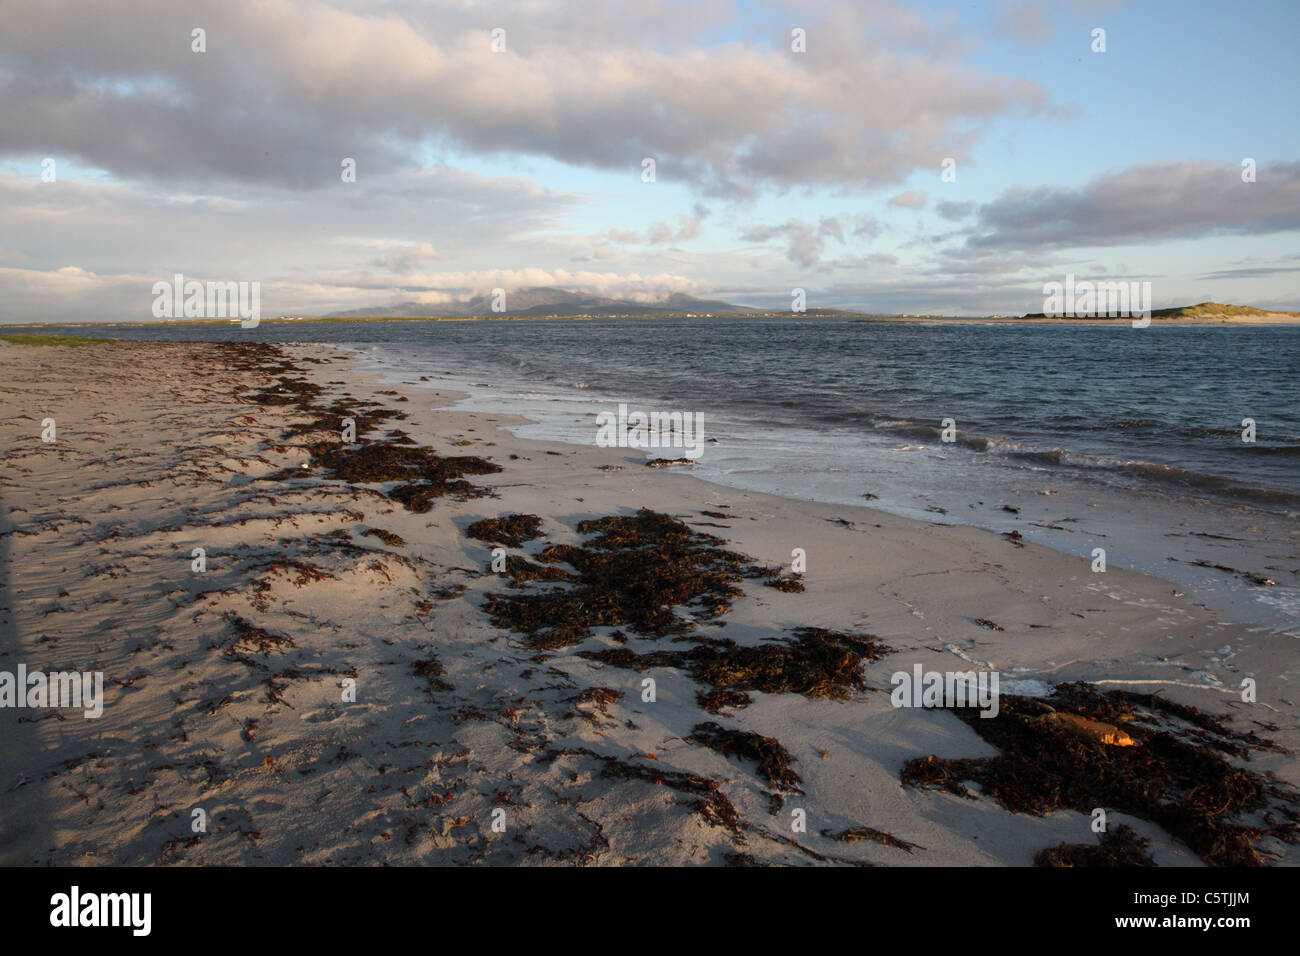 The beach at Eilean Siar, Benbecula, Outer Hebrides looking towards the mountains of South Uist Stock Photo